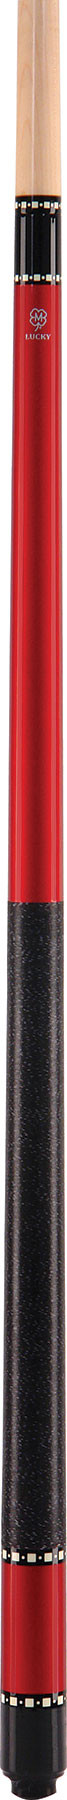 McDermott Lucky Pool Cue, L10, Red